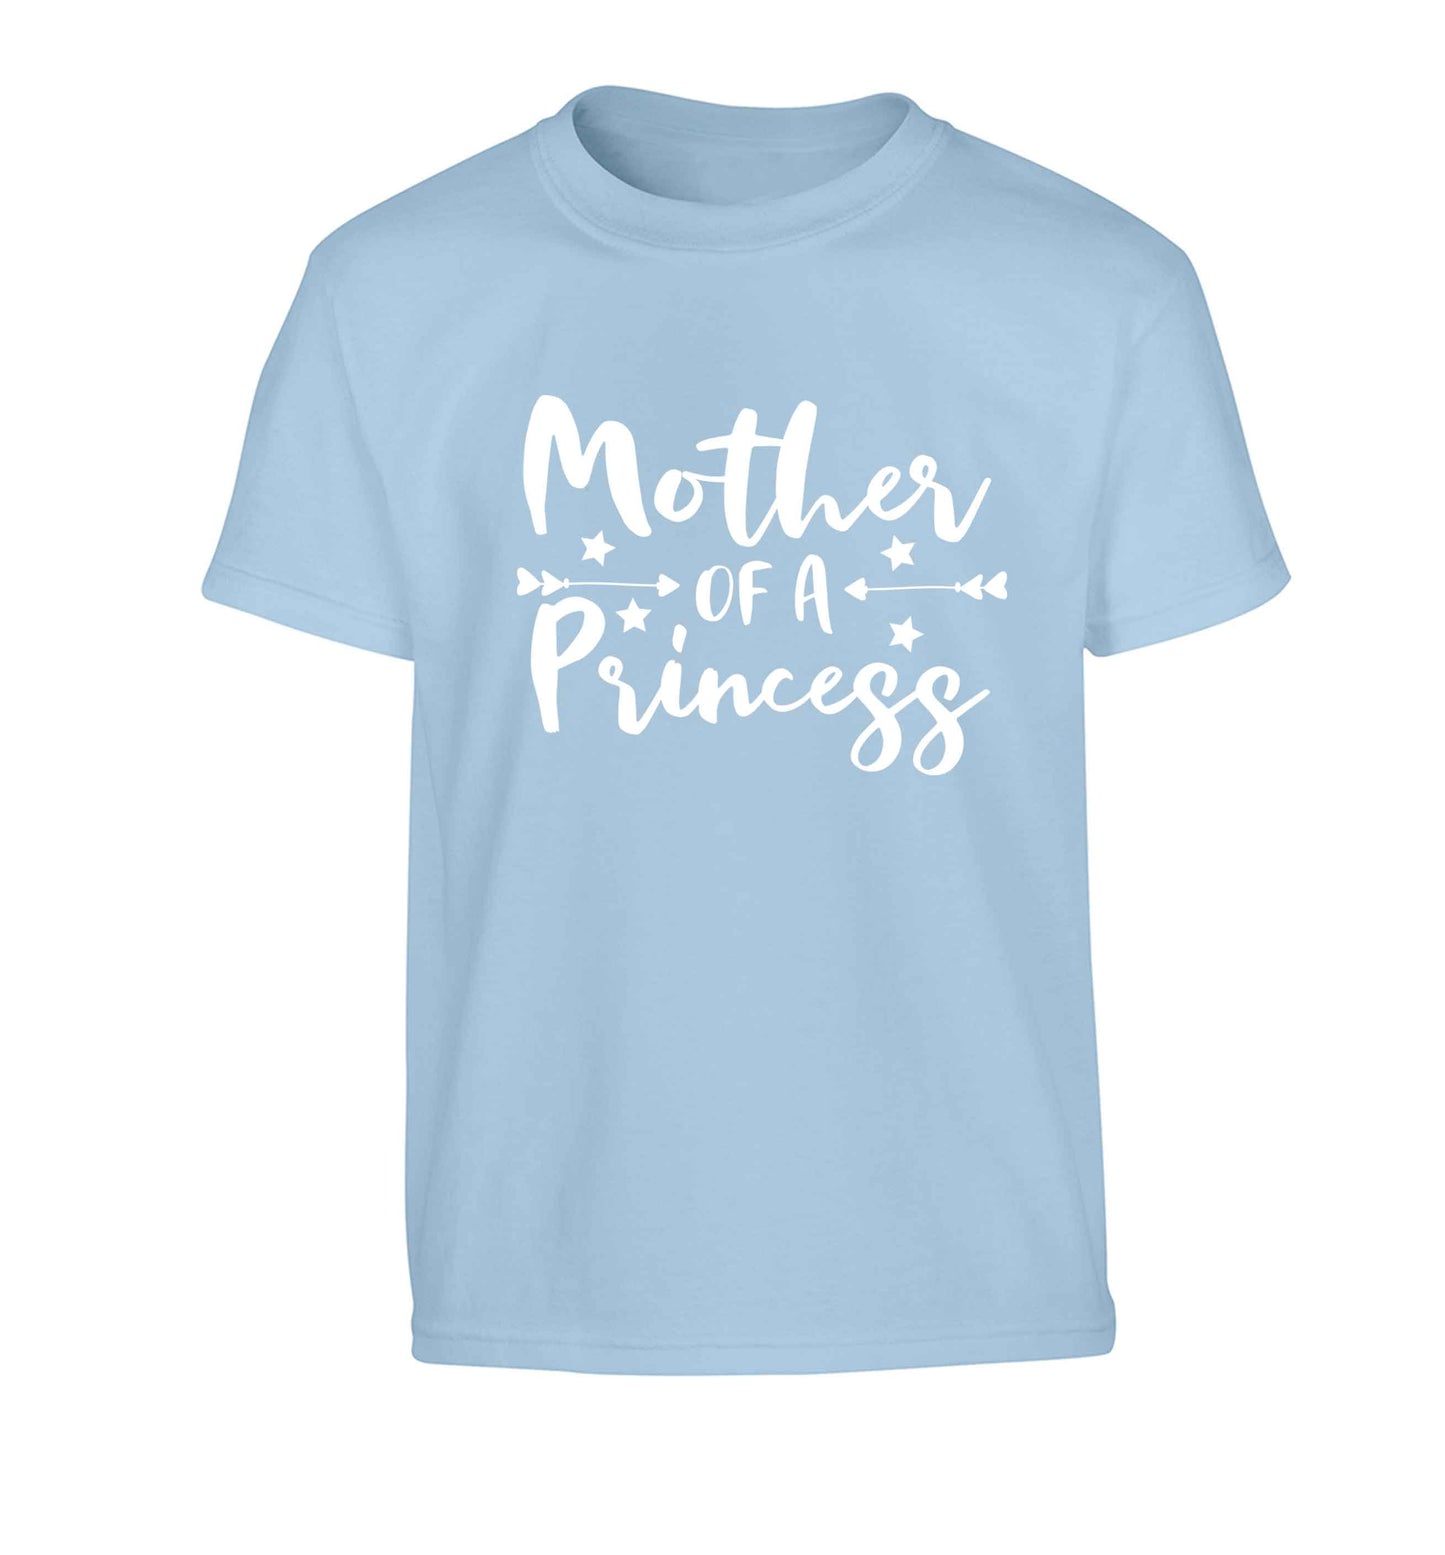 Mother of a princess Children's light blue Tshirt 12-13 Years